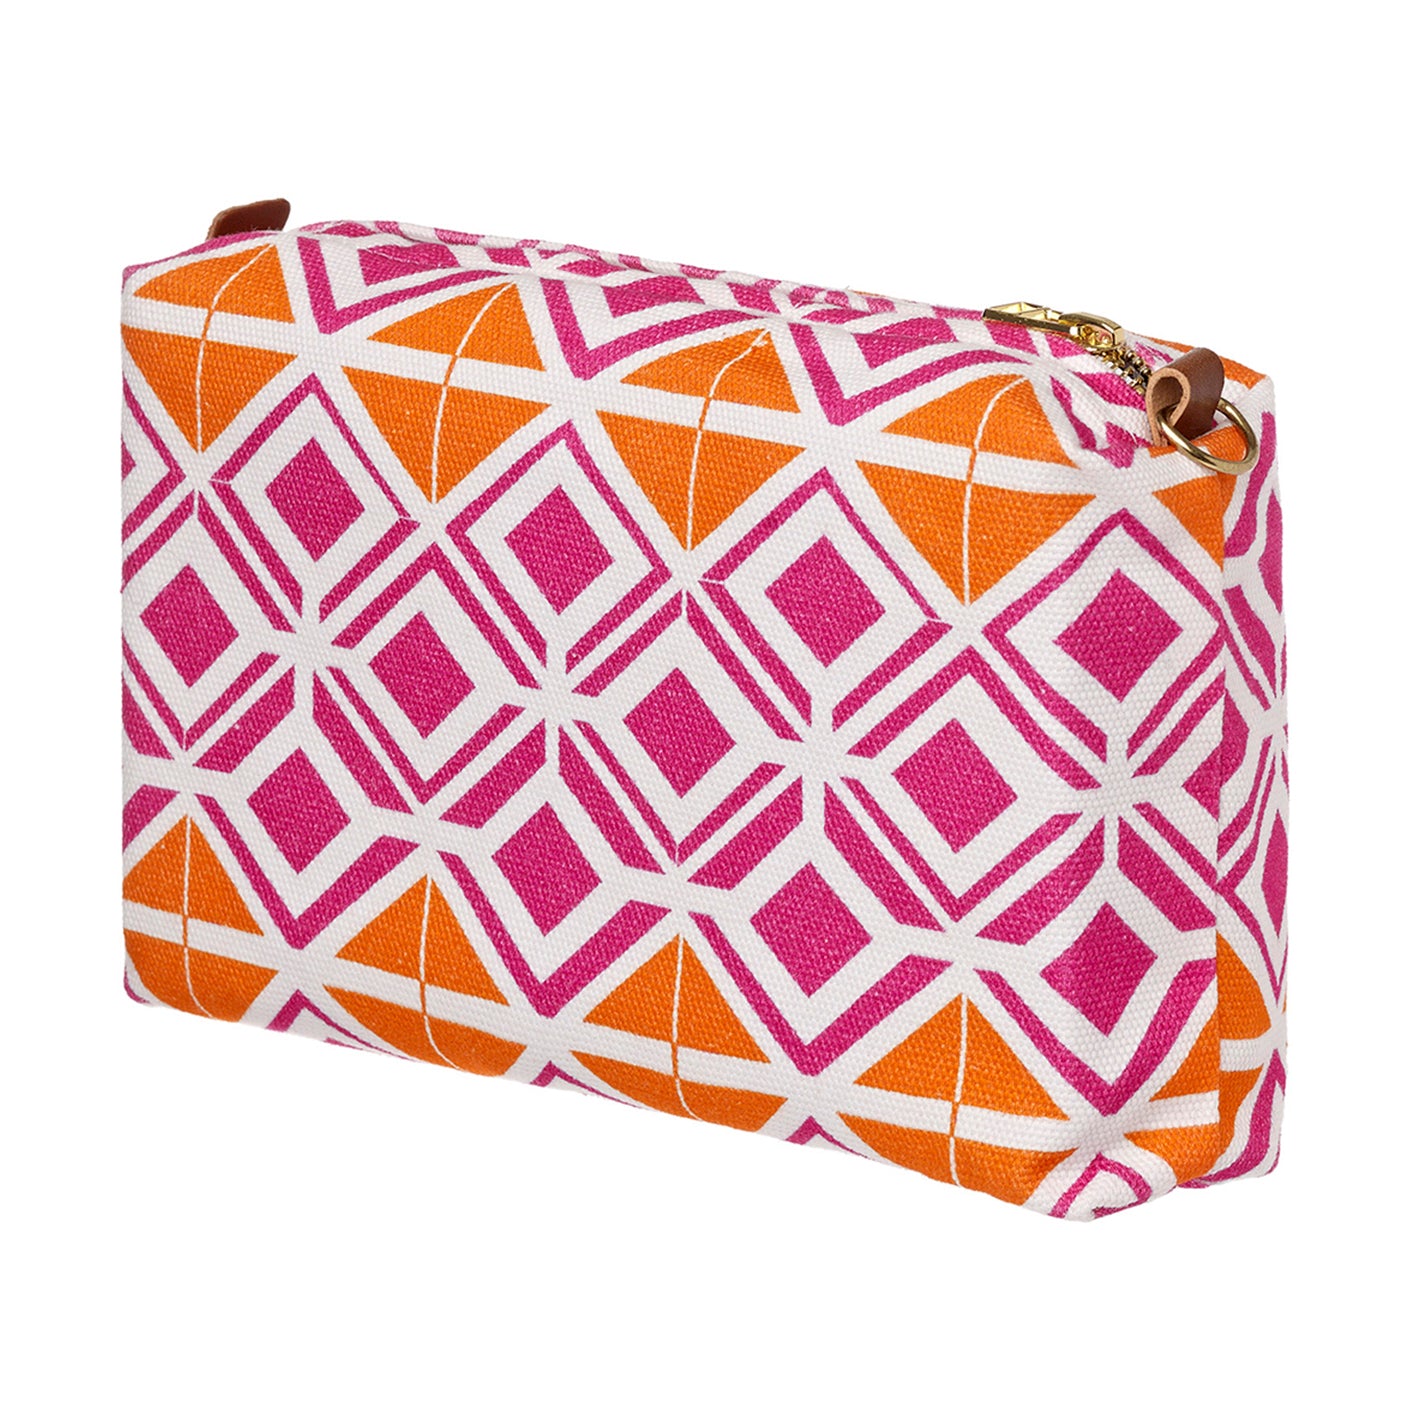 Glasswork Geometric Pattern Canvas Wash toiletry travel Bag in Bright Fuchsia Pink / Pumpkin Orange ships from Canada perfect for cosmetics